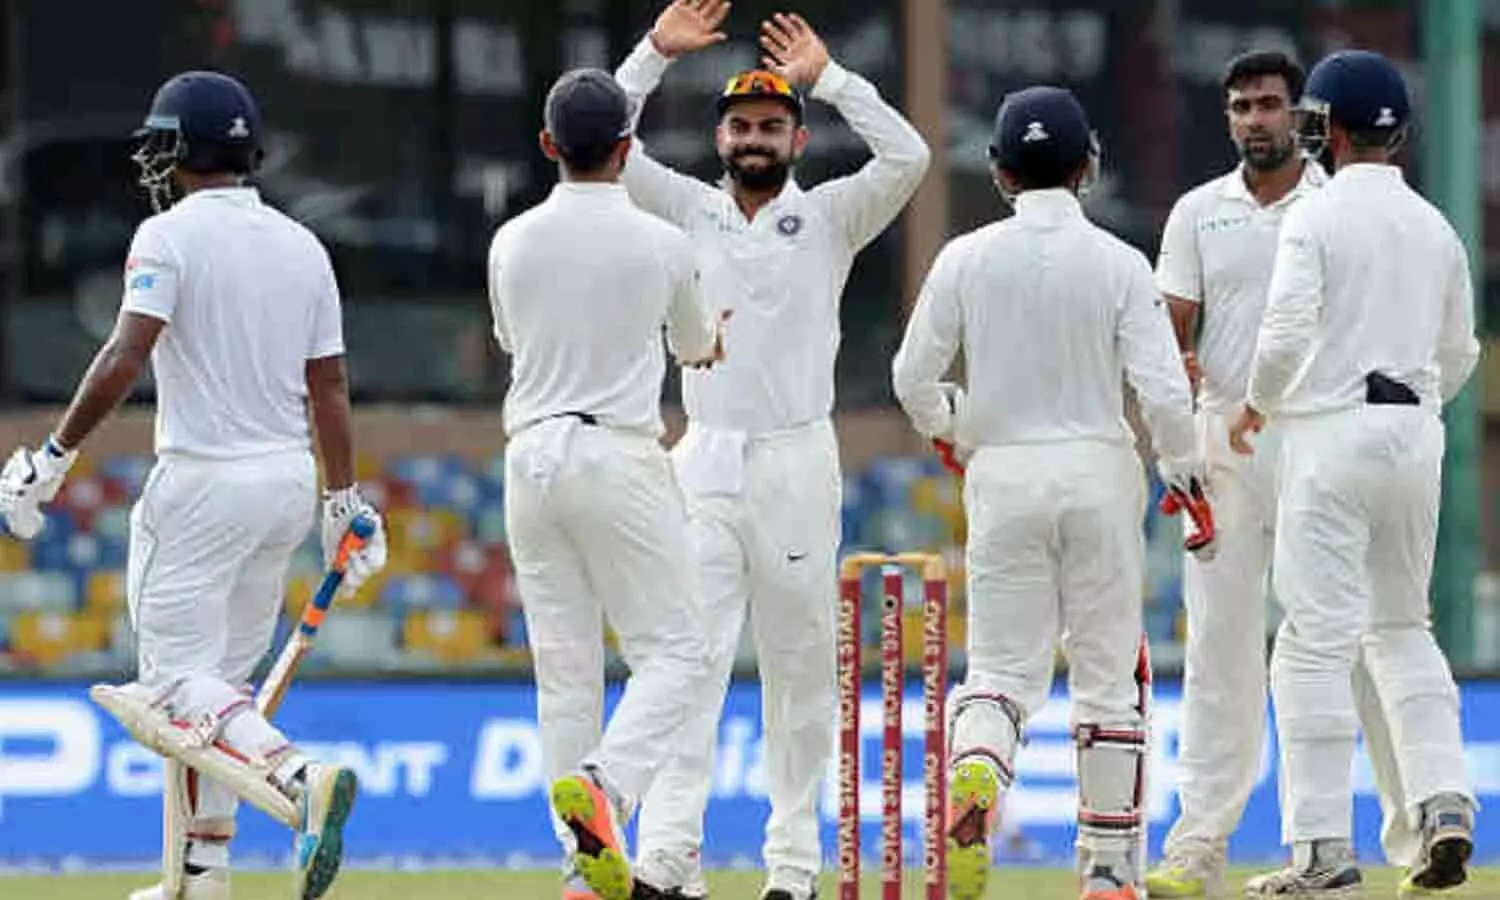 IND VS SL 1ST TEST: Day 2 end, Sri Lanka scored 108 runs for the loss of 4 wickets